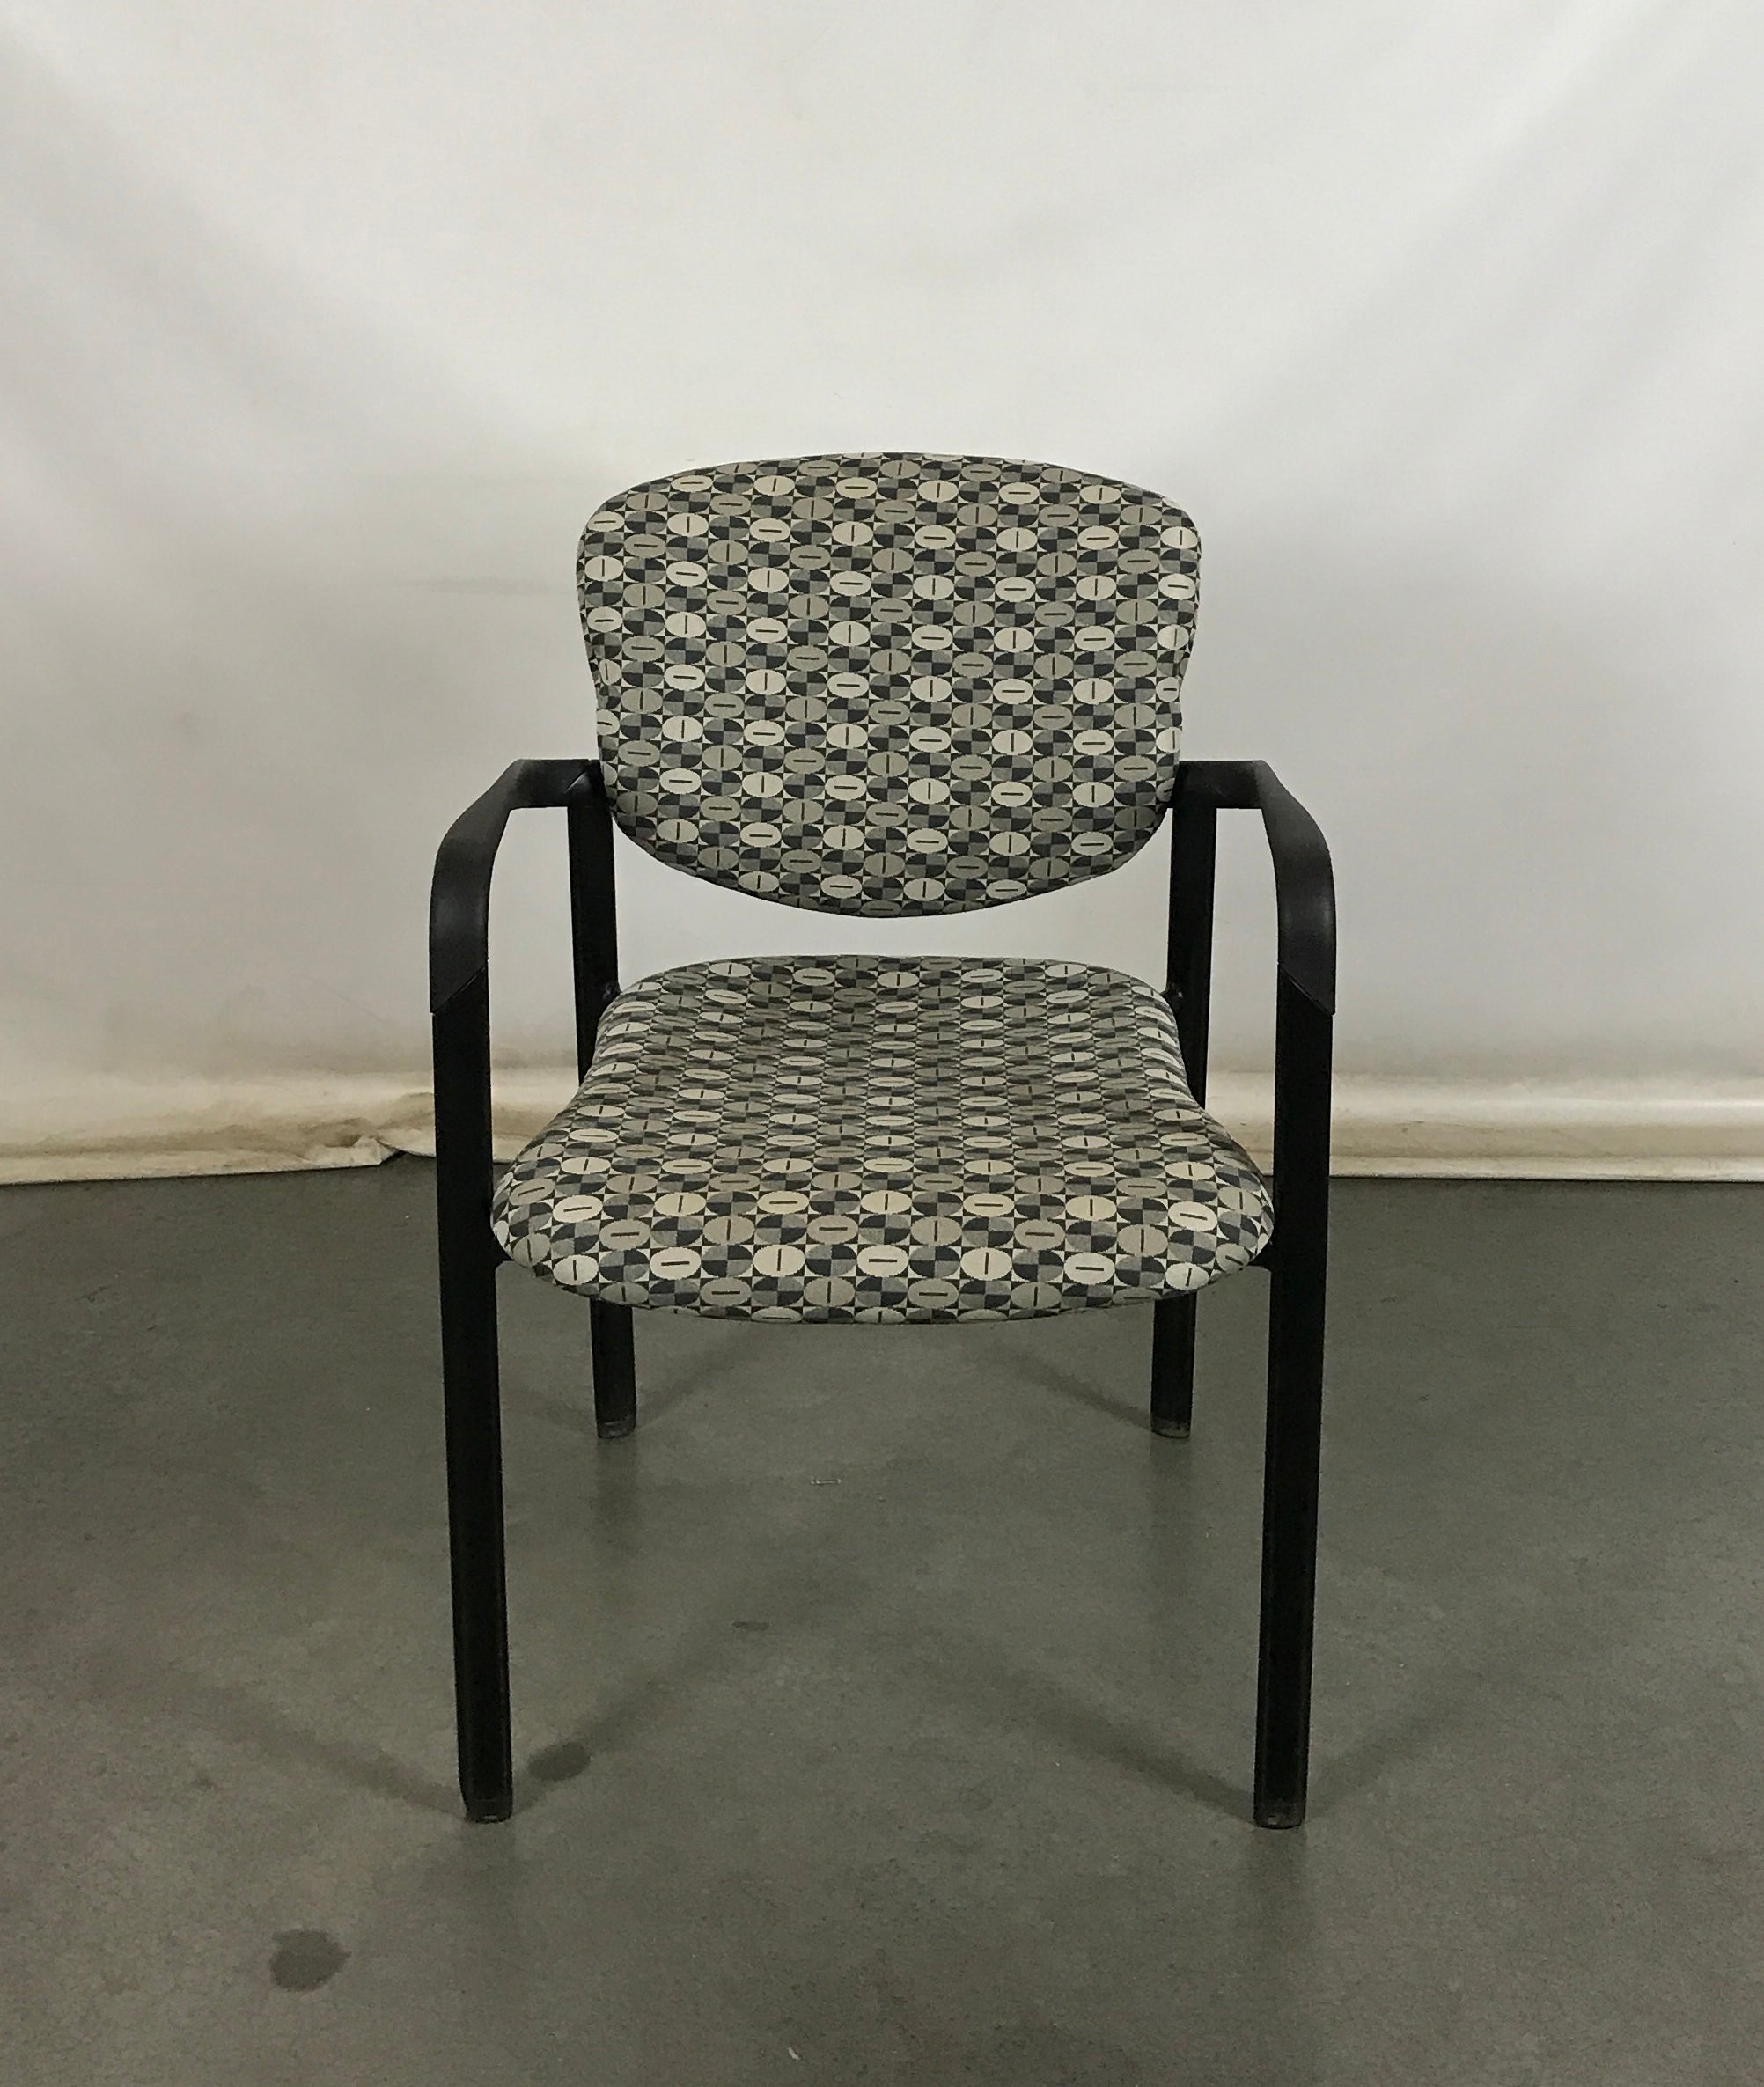 Haworth Patterned Chair